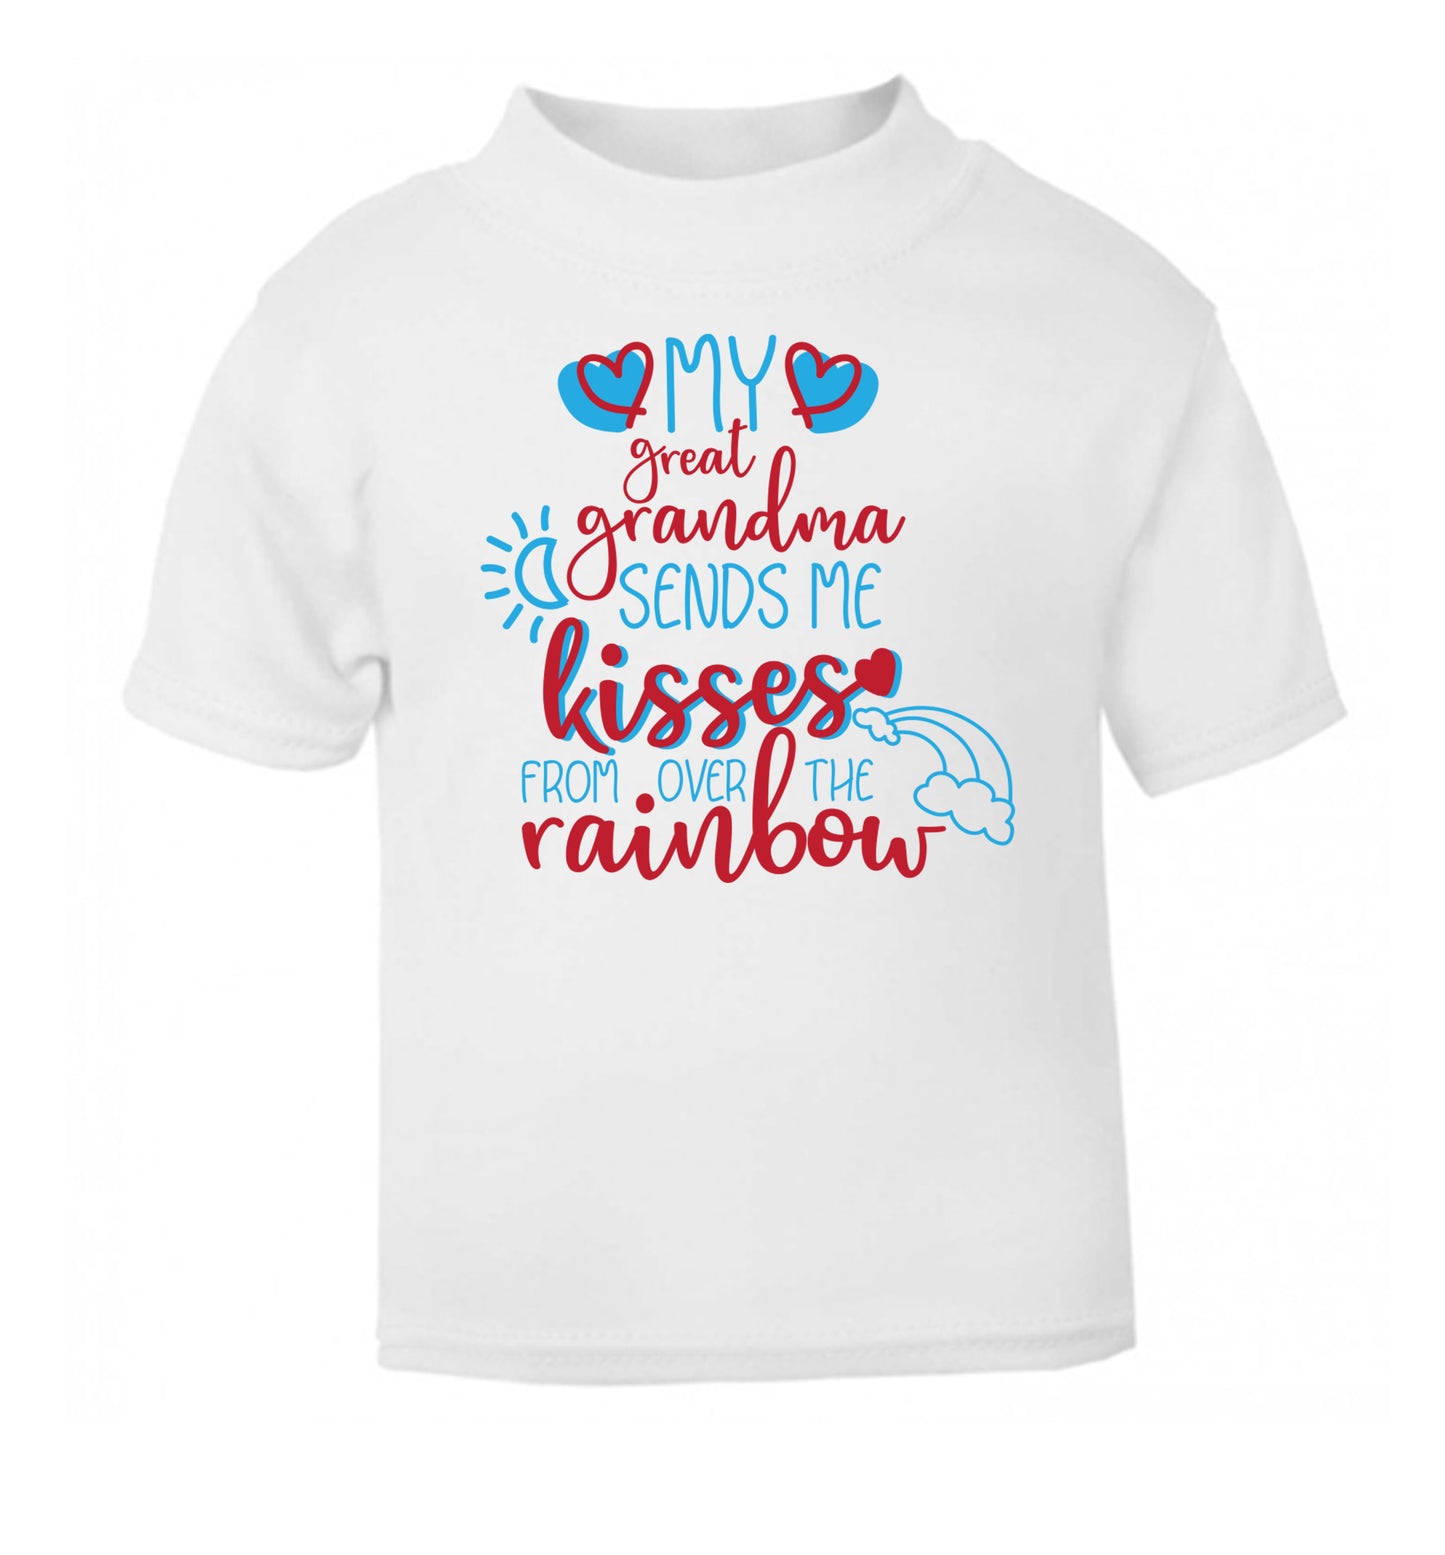 My great grandma sends me kisses from over the rainbow white Baby Toddler Tshirt 2 Years